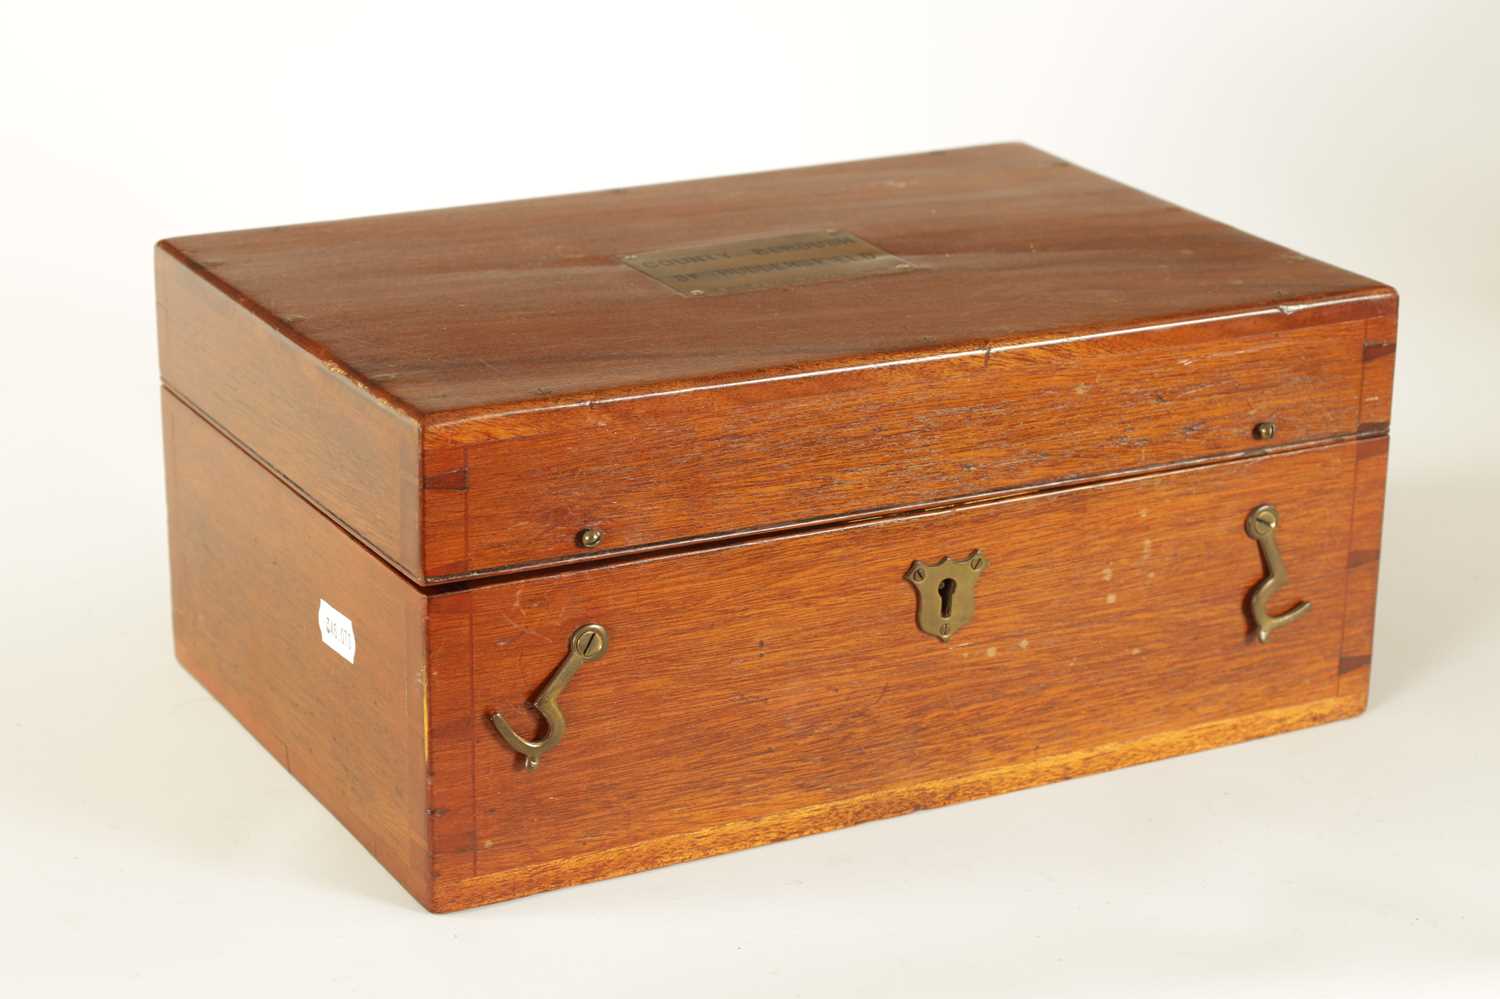 DE GRAVE & CO. LTD, MAKERS LONDON. A GOOD EARLY 20TH CENTURY MAHOGANY CASED SET OF TRADING STANDARDS - Image 3 of 24